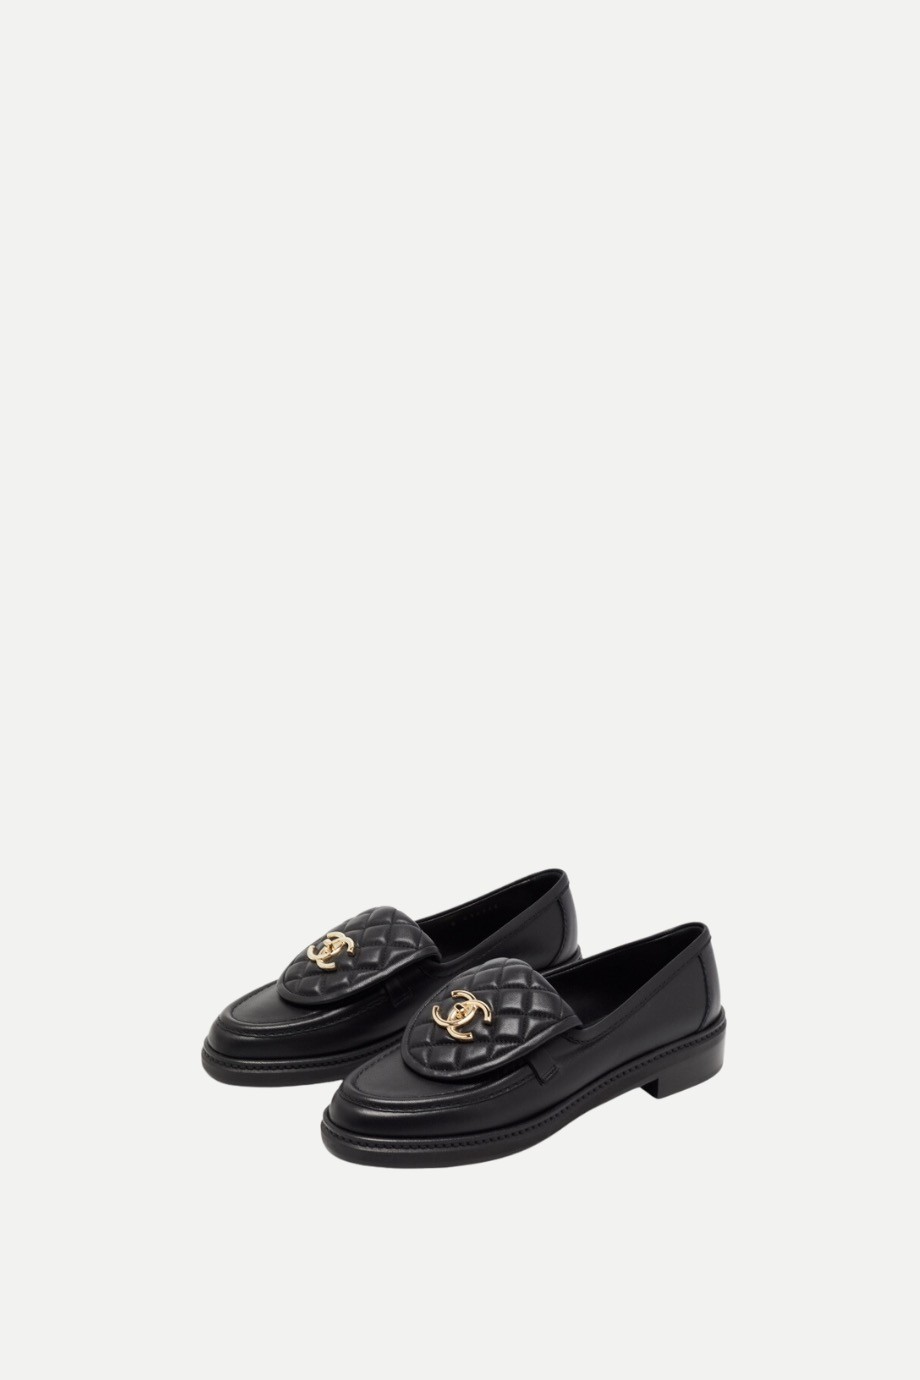 Chanel - Quilted Flap Turnlock CC Loafers - Black